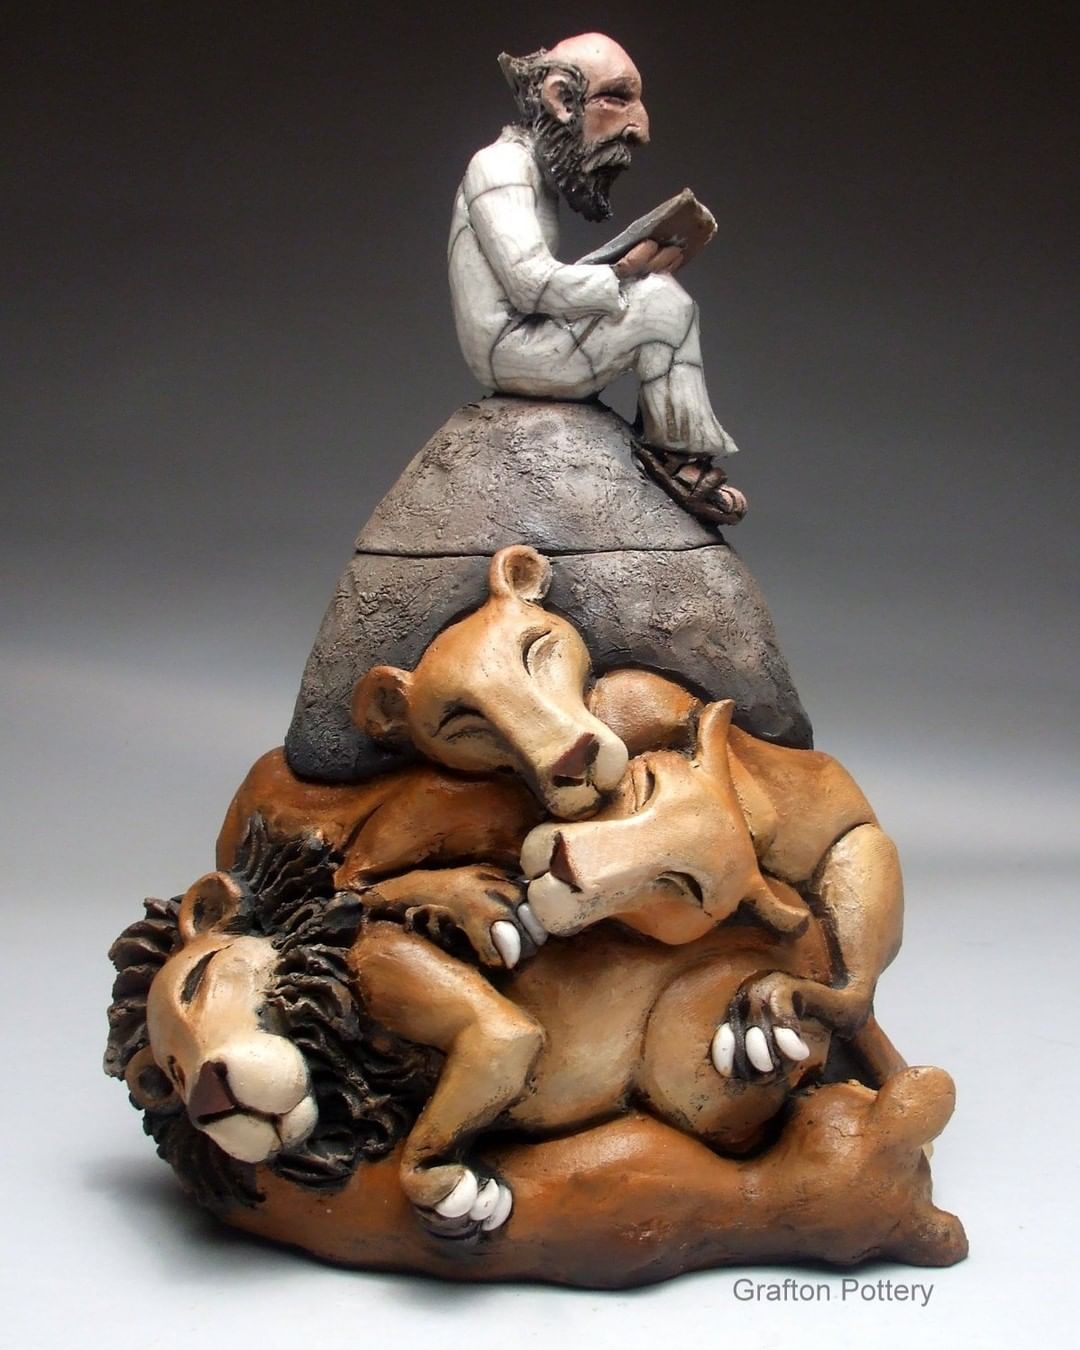 Ceramic Fairytales, Intricate Sculptures, Teapots, And Mugs By Mitchell Grafton (18)